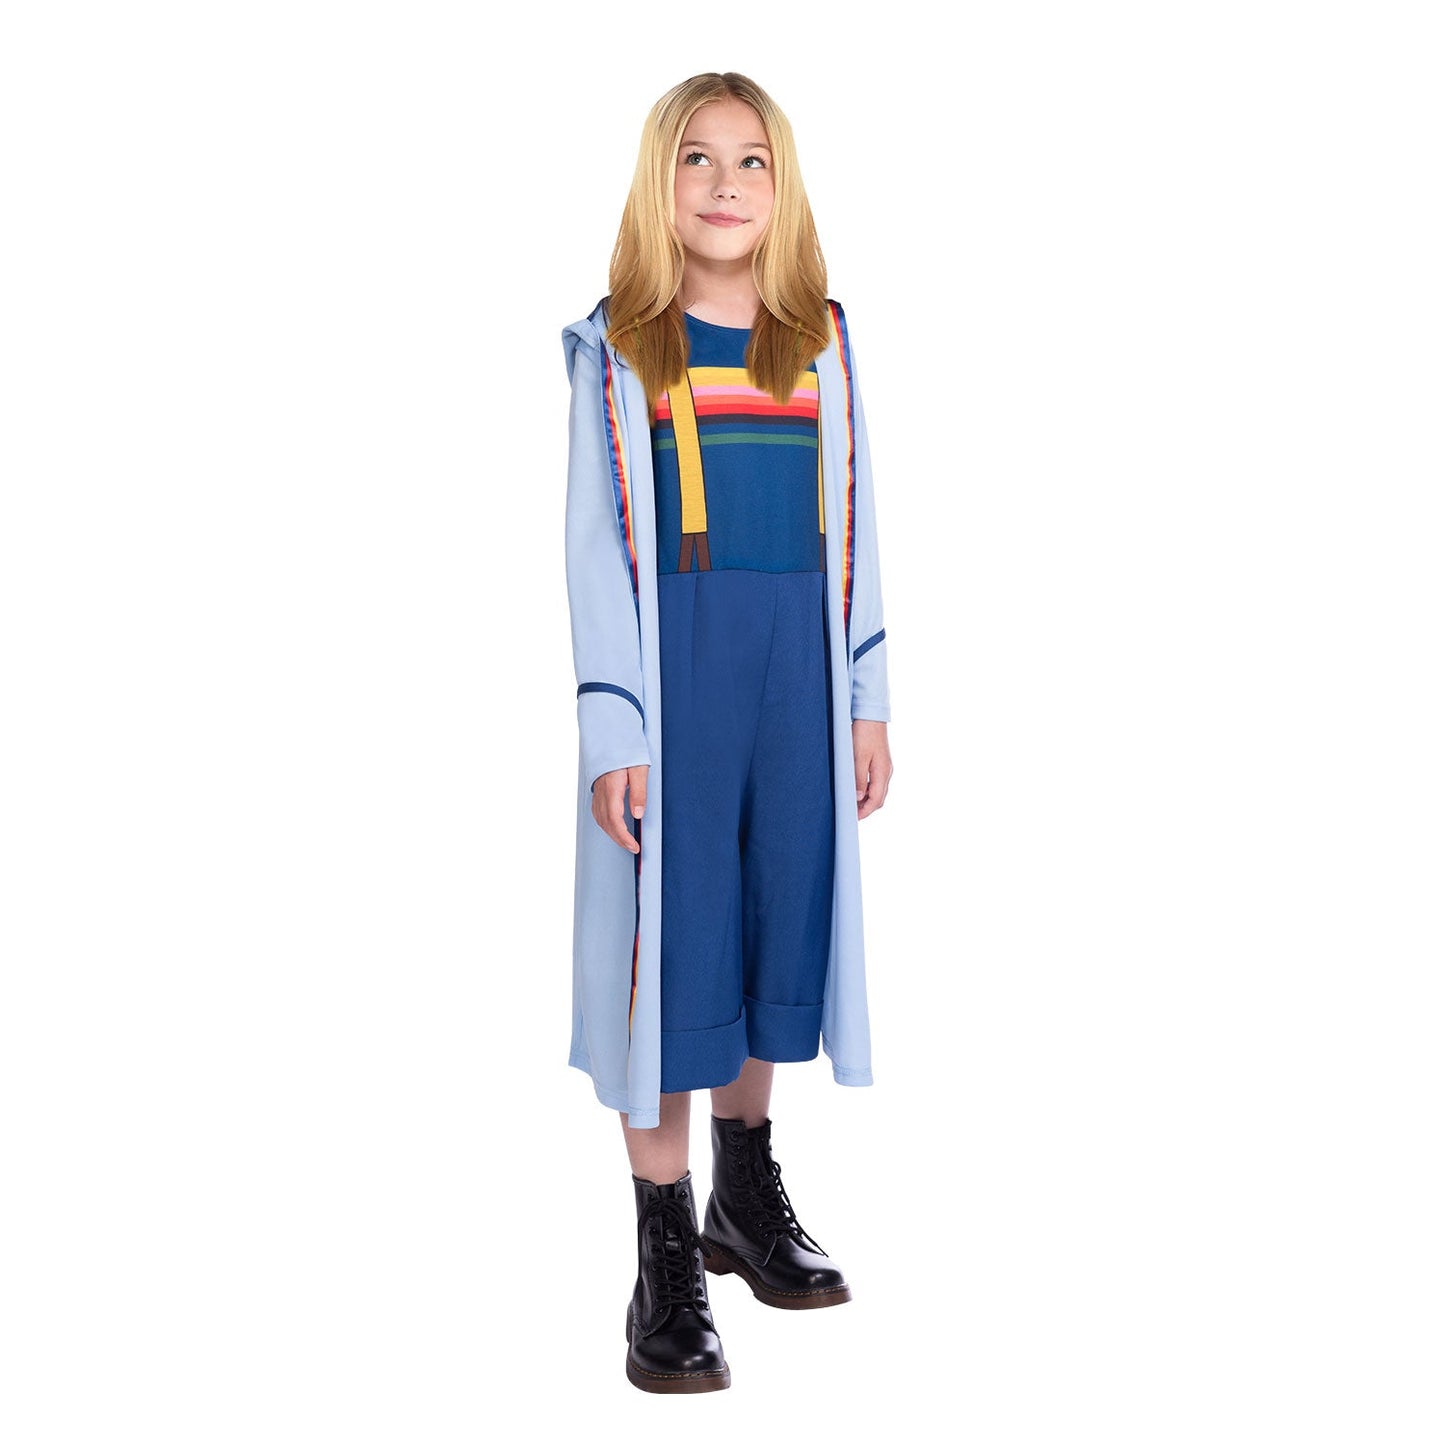 Doctor Who Female Costume includes jumpsuit and jacket